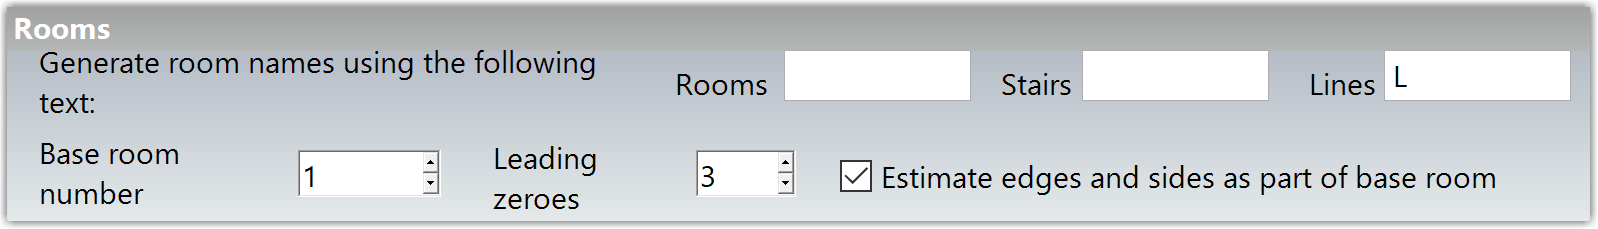 rooms.png